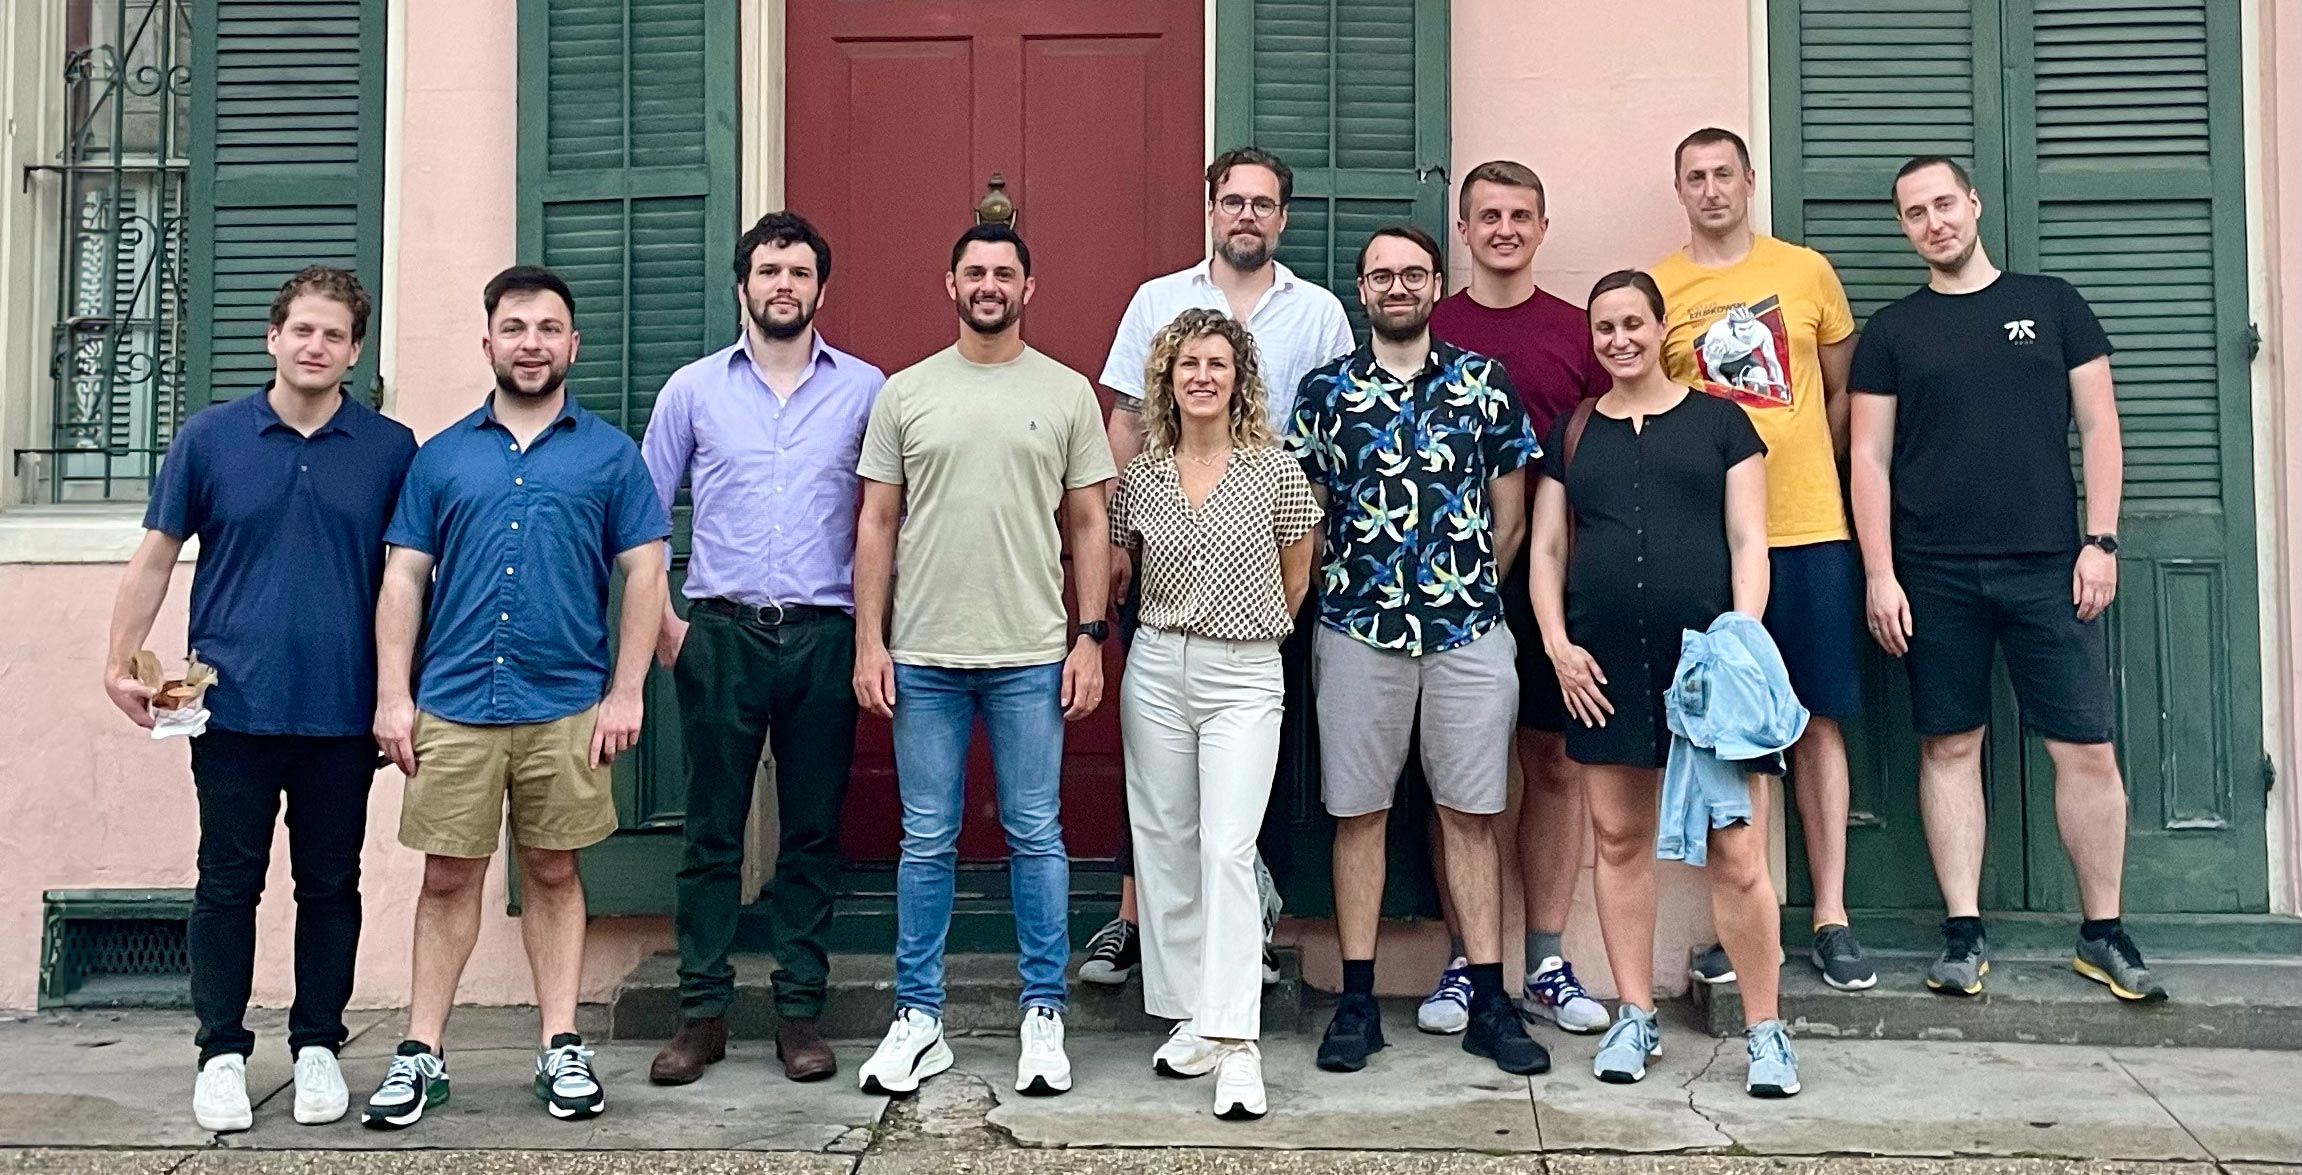 The Plural team standing together on a sidewalk in the French Quarter of New Orleans.